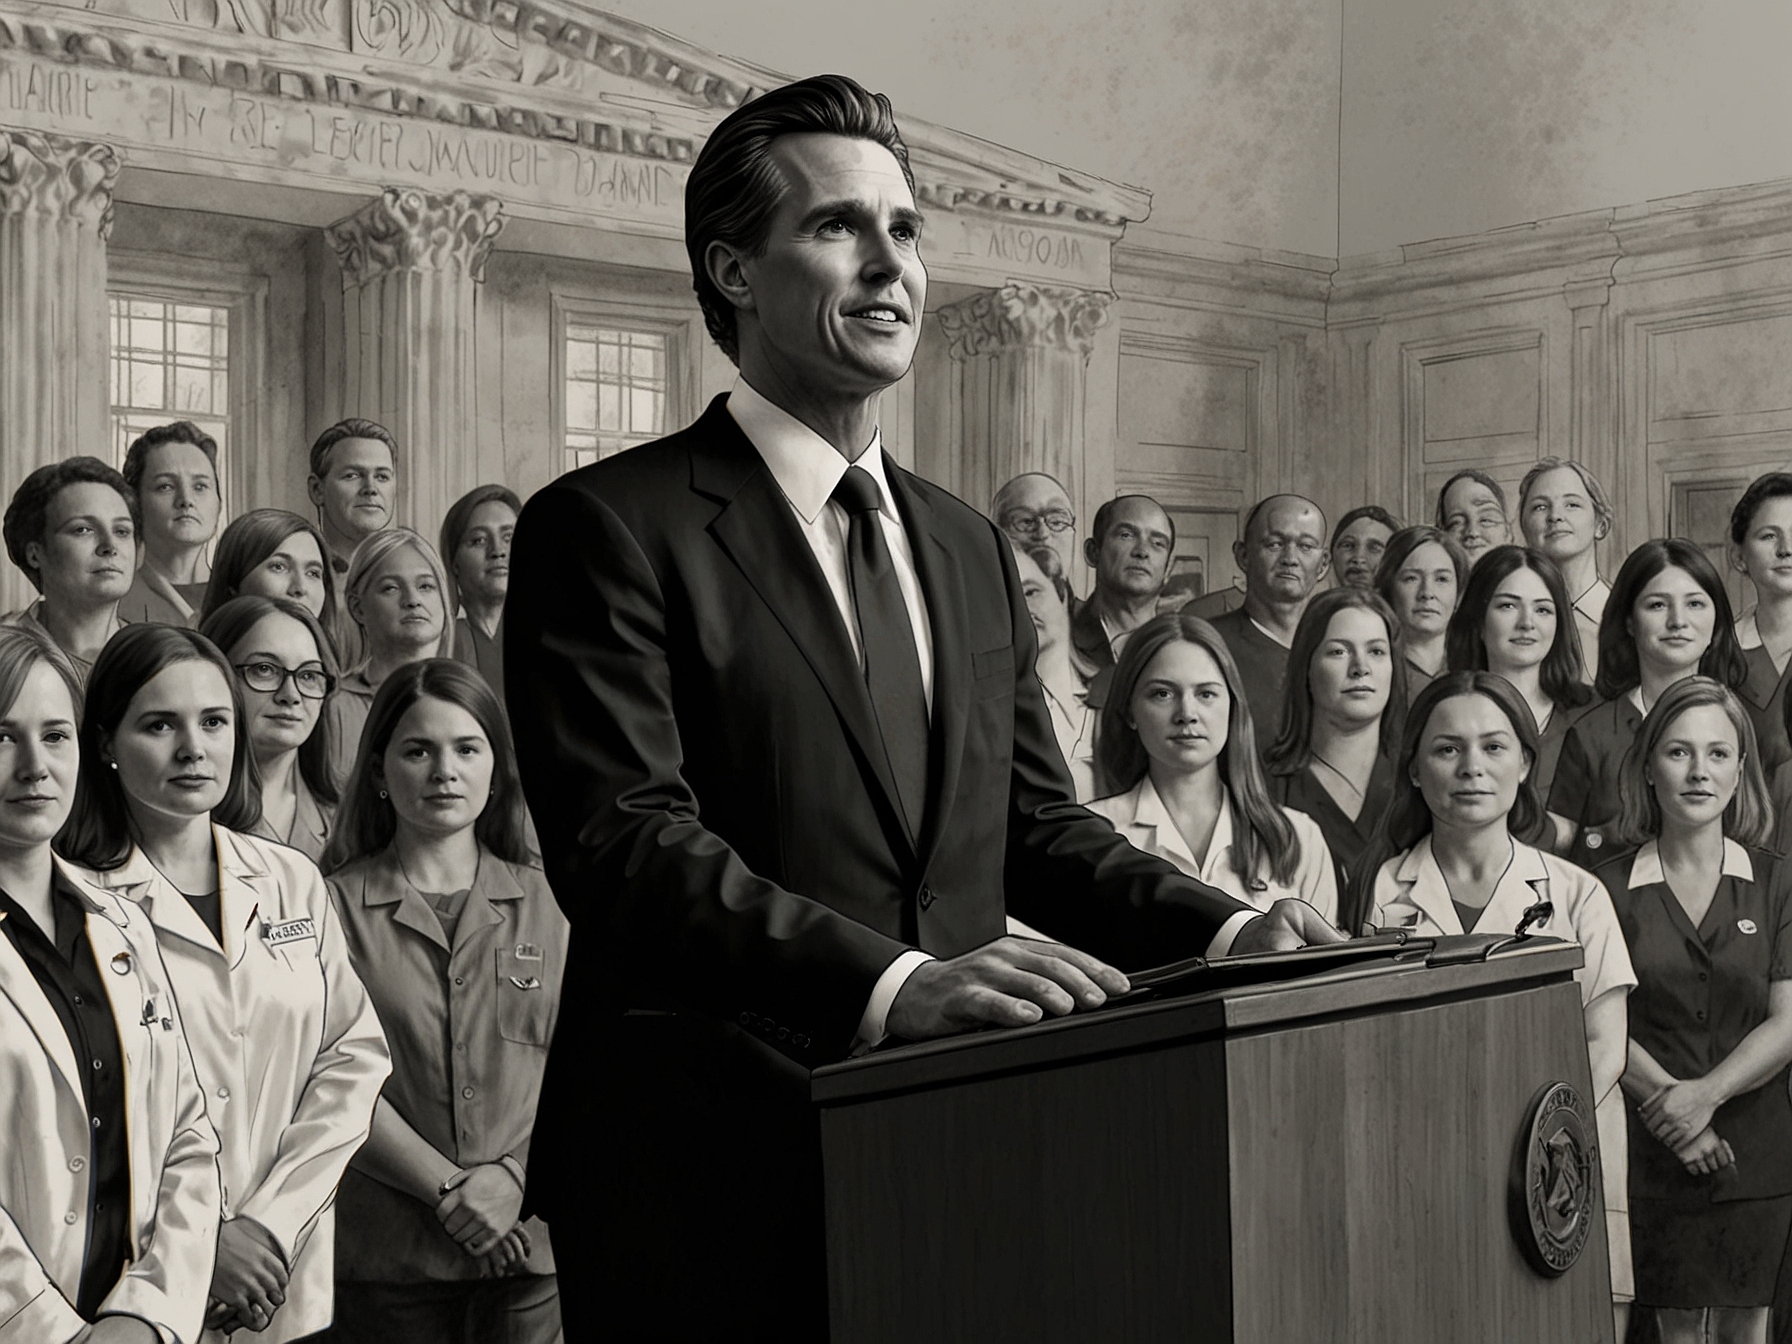 Governor Gavin Newsom addressing the media, applauding the Supreme Court's decision, with a backdrop of nurses, teachers, and infrastructure workers representing funded public services.